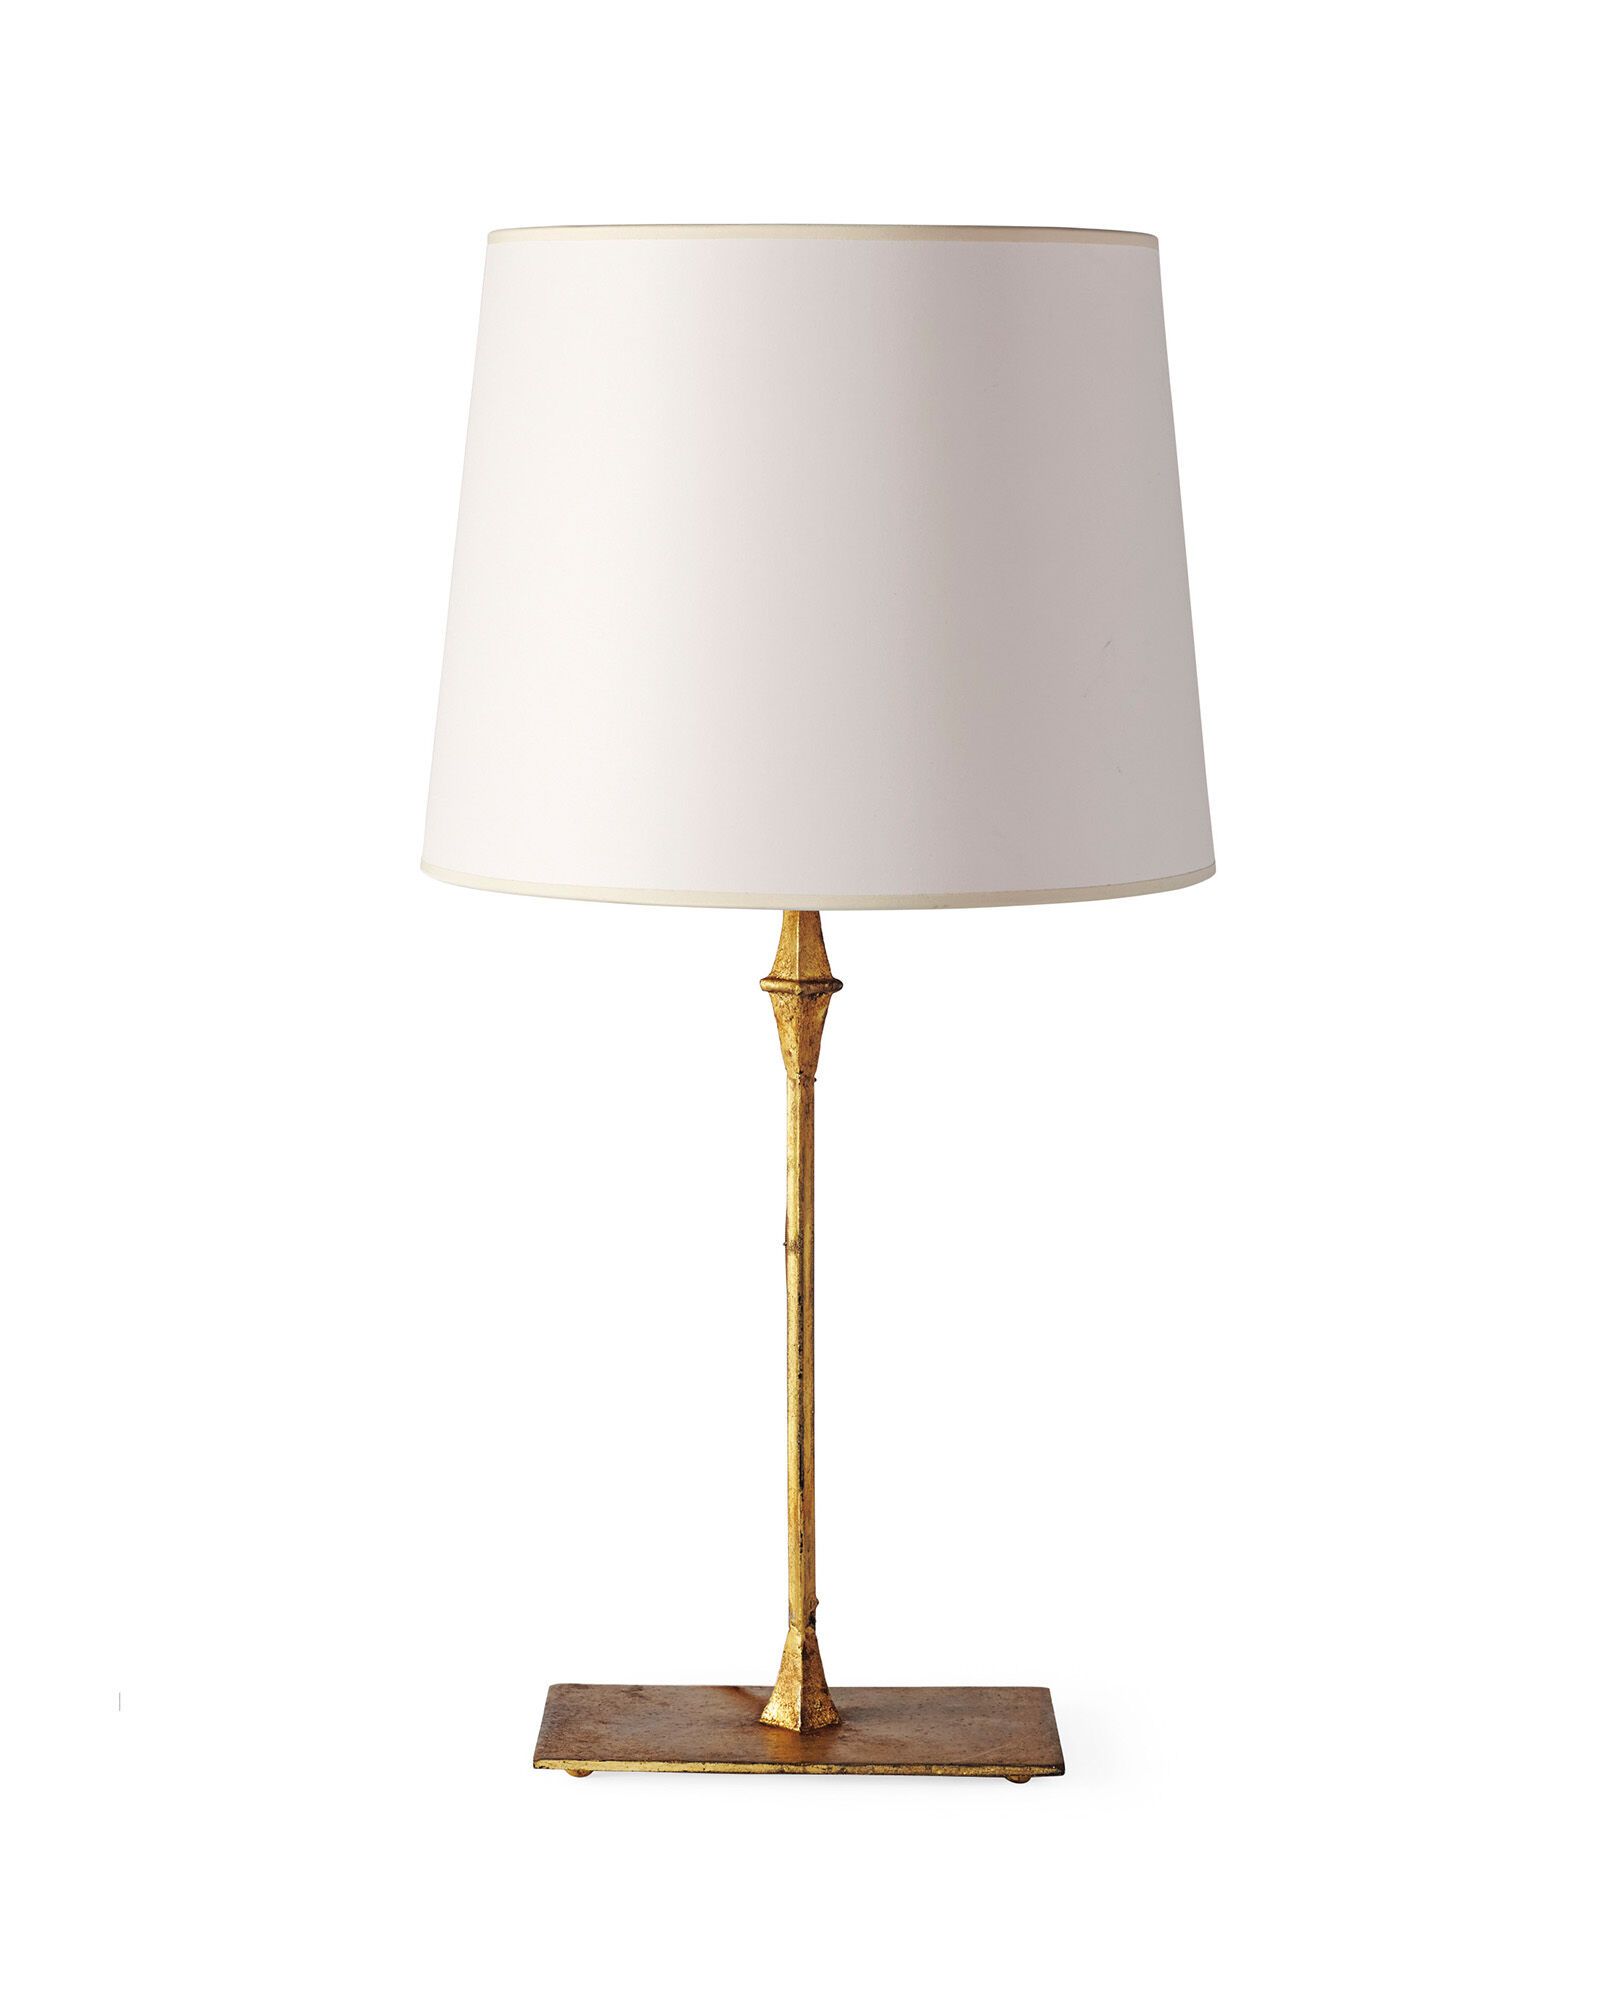 Dauphine Table Lamp | Serena and Lily